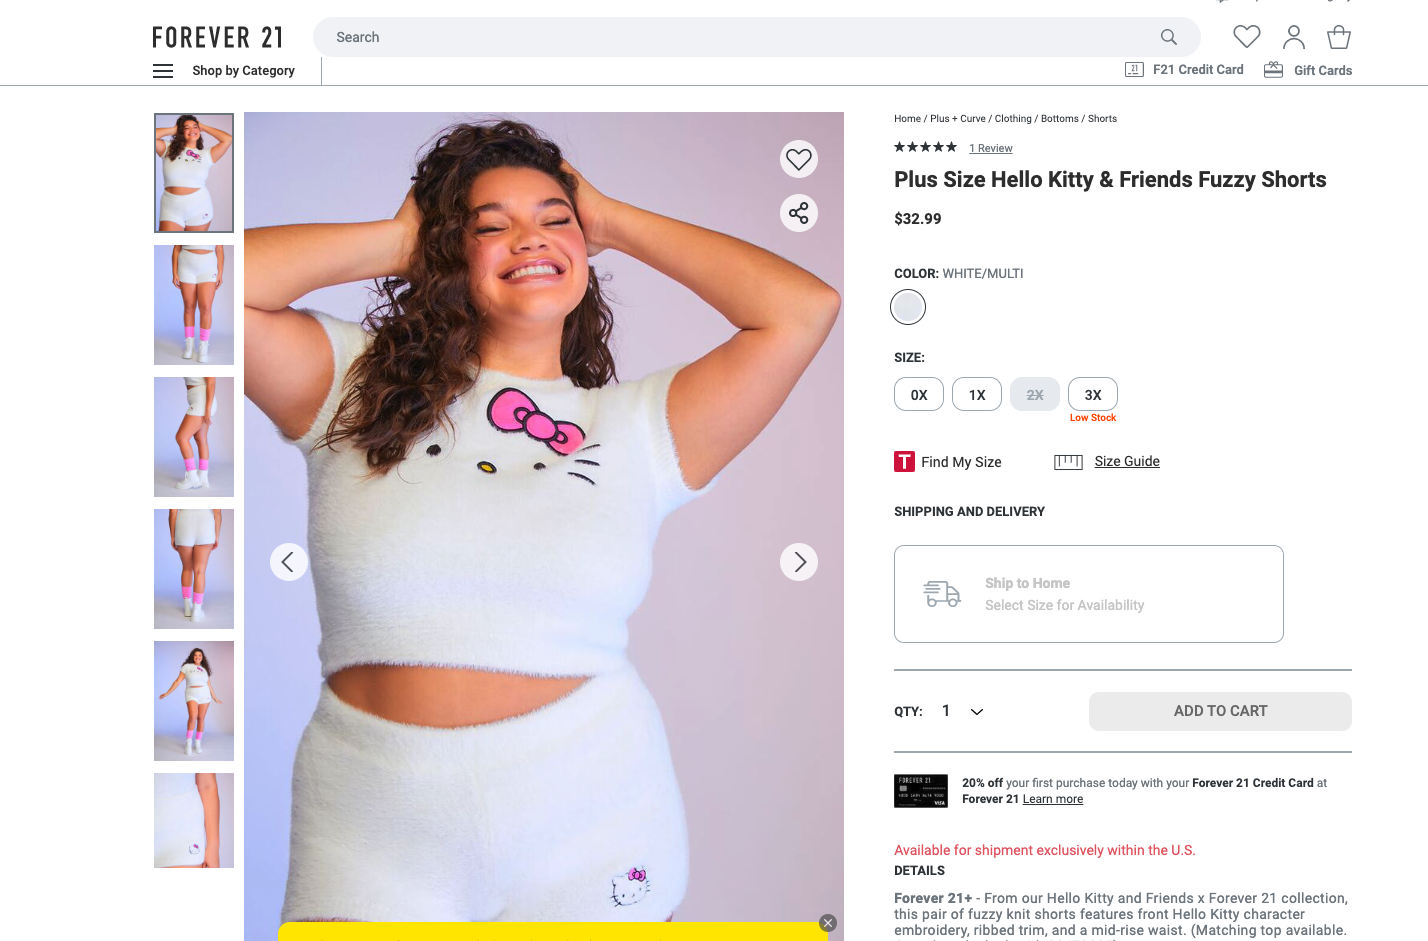 Forever 21 Product Page Example